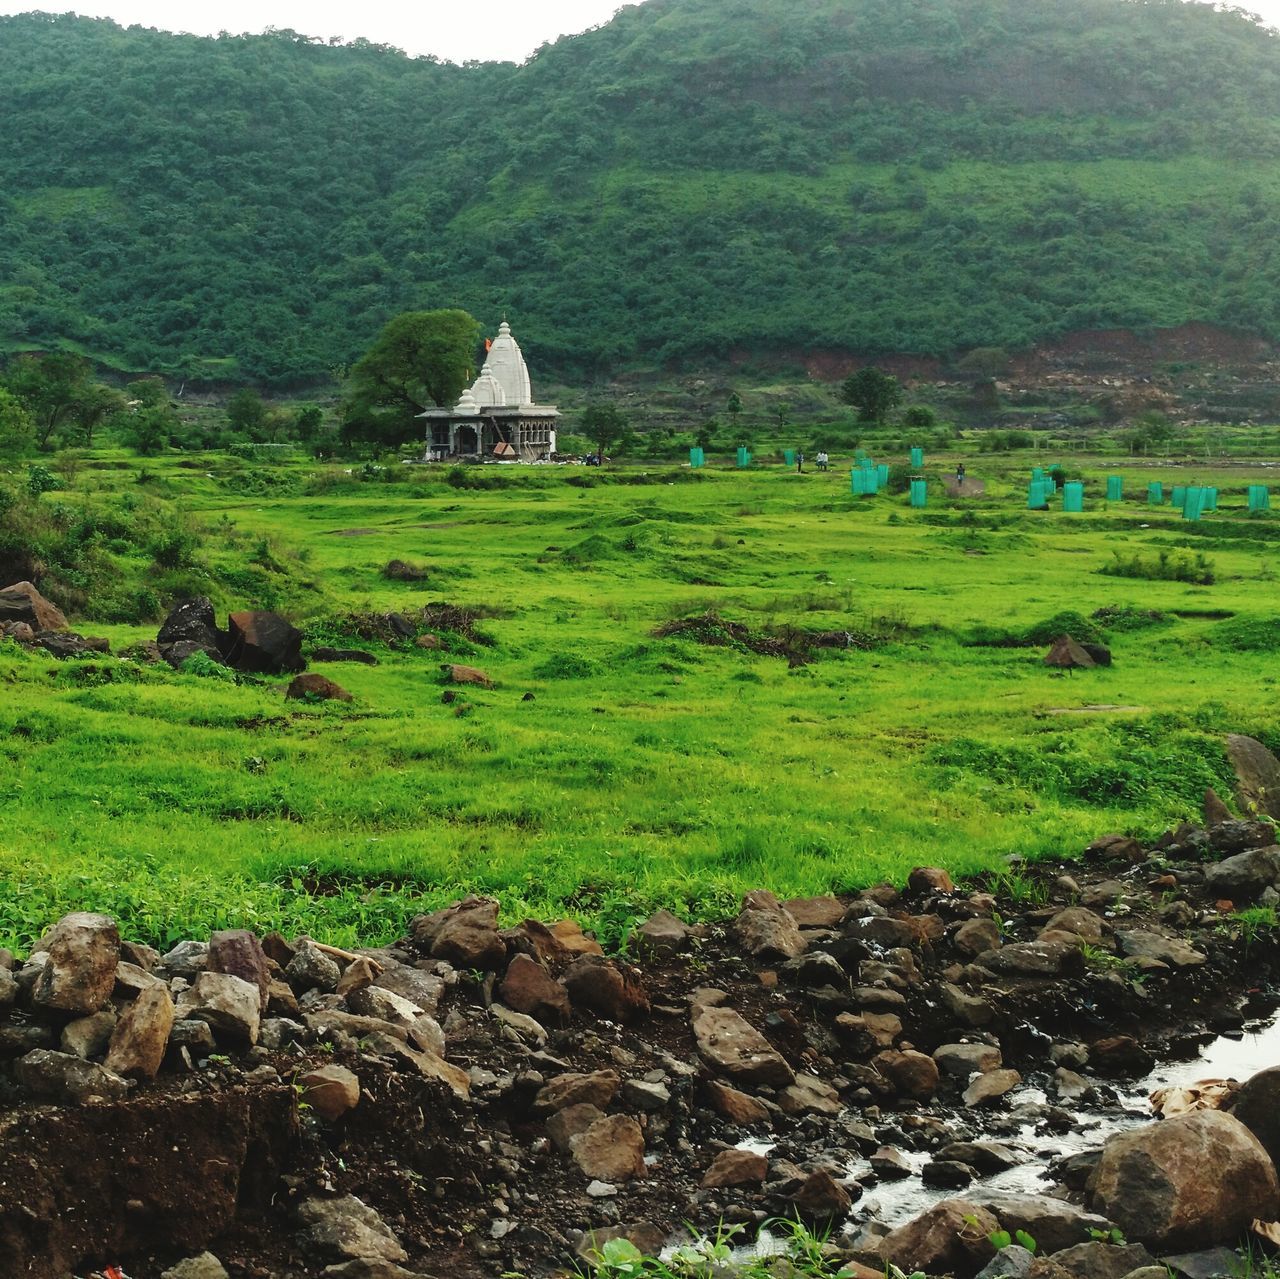 mountain, built structure, architecture, landscape, green color, grass, tranquil scene, tranquility, scenics, beauty in nature, mountain range, nature, hill, non-urban scene, day, growth, sky, outdoors, plant, idyllic, village, rural scene, remote, no people, travel destinations, green, lush foliage